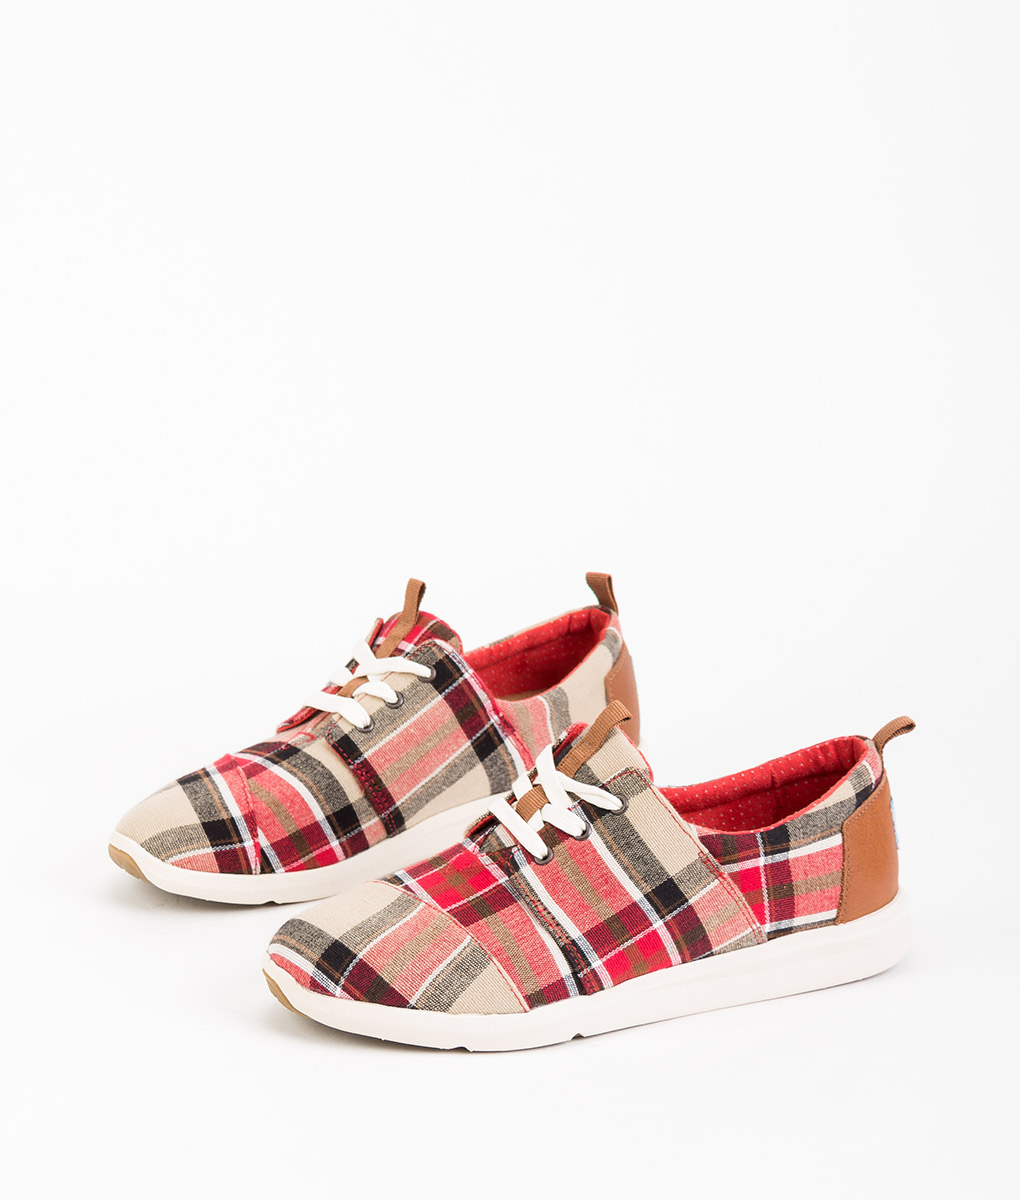 TOMS Women Sneakers 8895 DEL RAY, Red Warm Tan 89.99